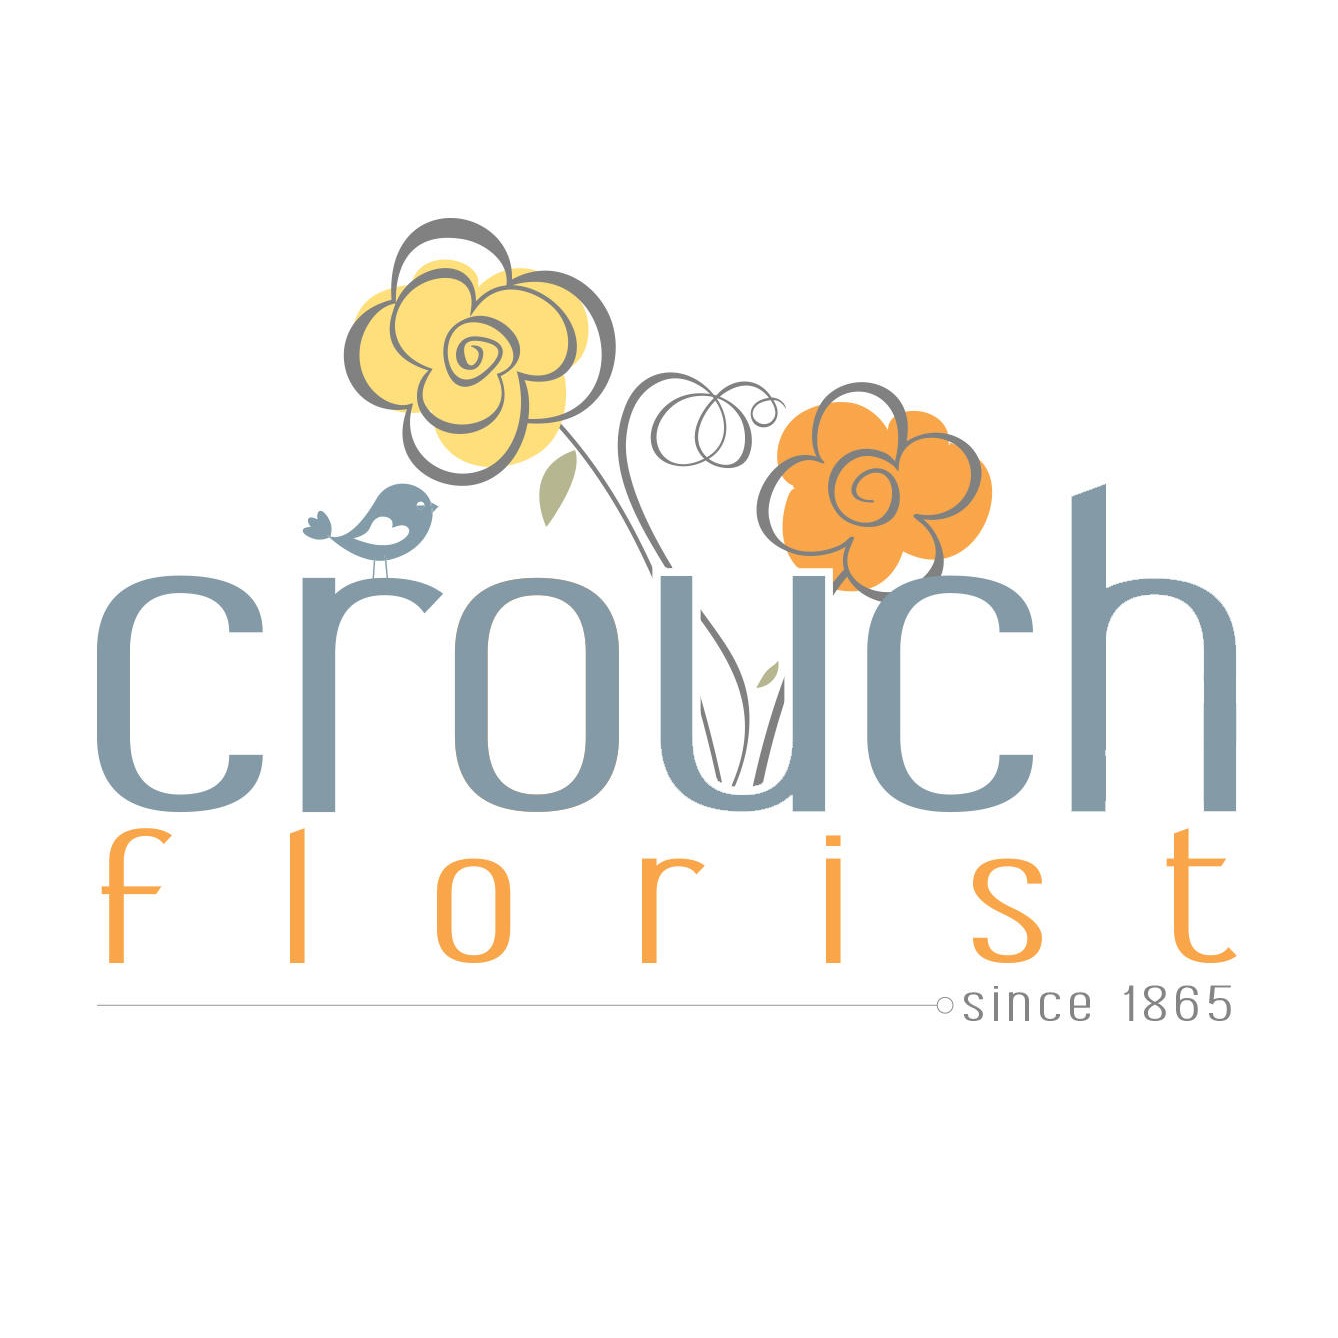 Crouch Florist & Gifts